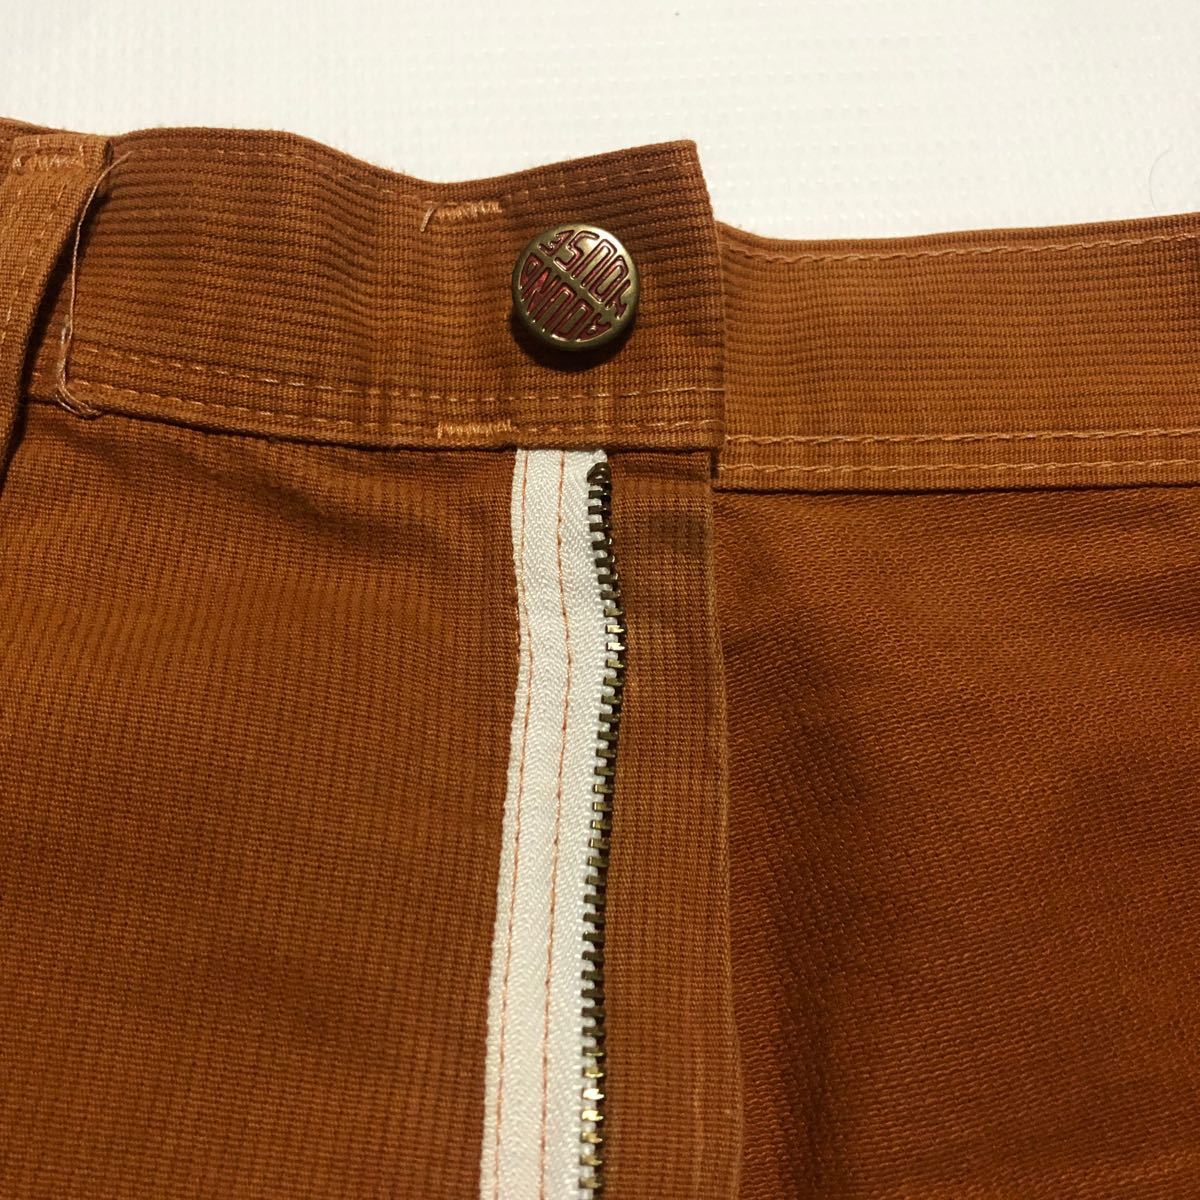 Vintage/70's-80's/ROUND HOUSE/Corduroy Painter Pants/Made in USA/Brown/ラウンドハウス/コーデュロイペインターパンツ/赤茶/米国製_画像7